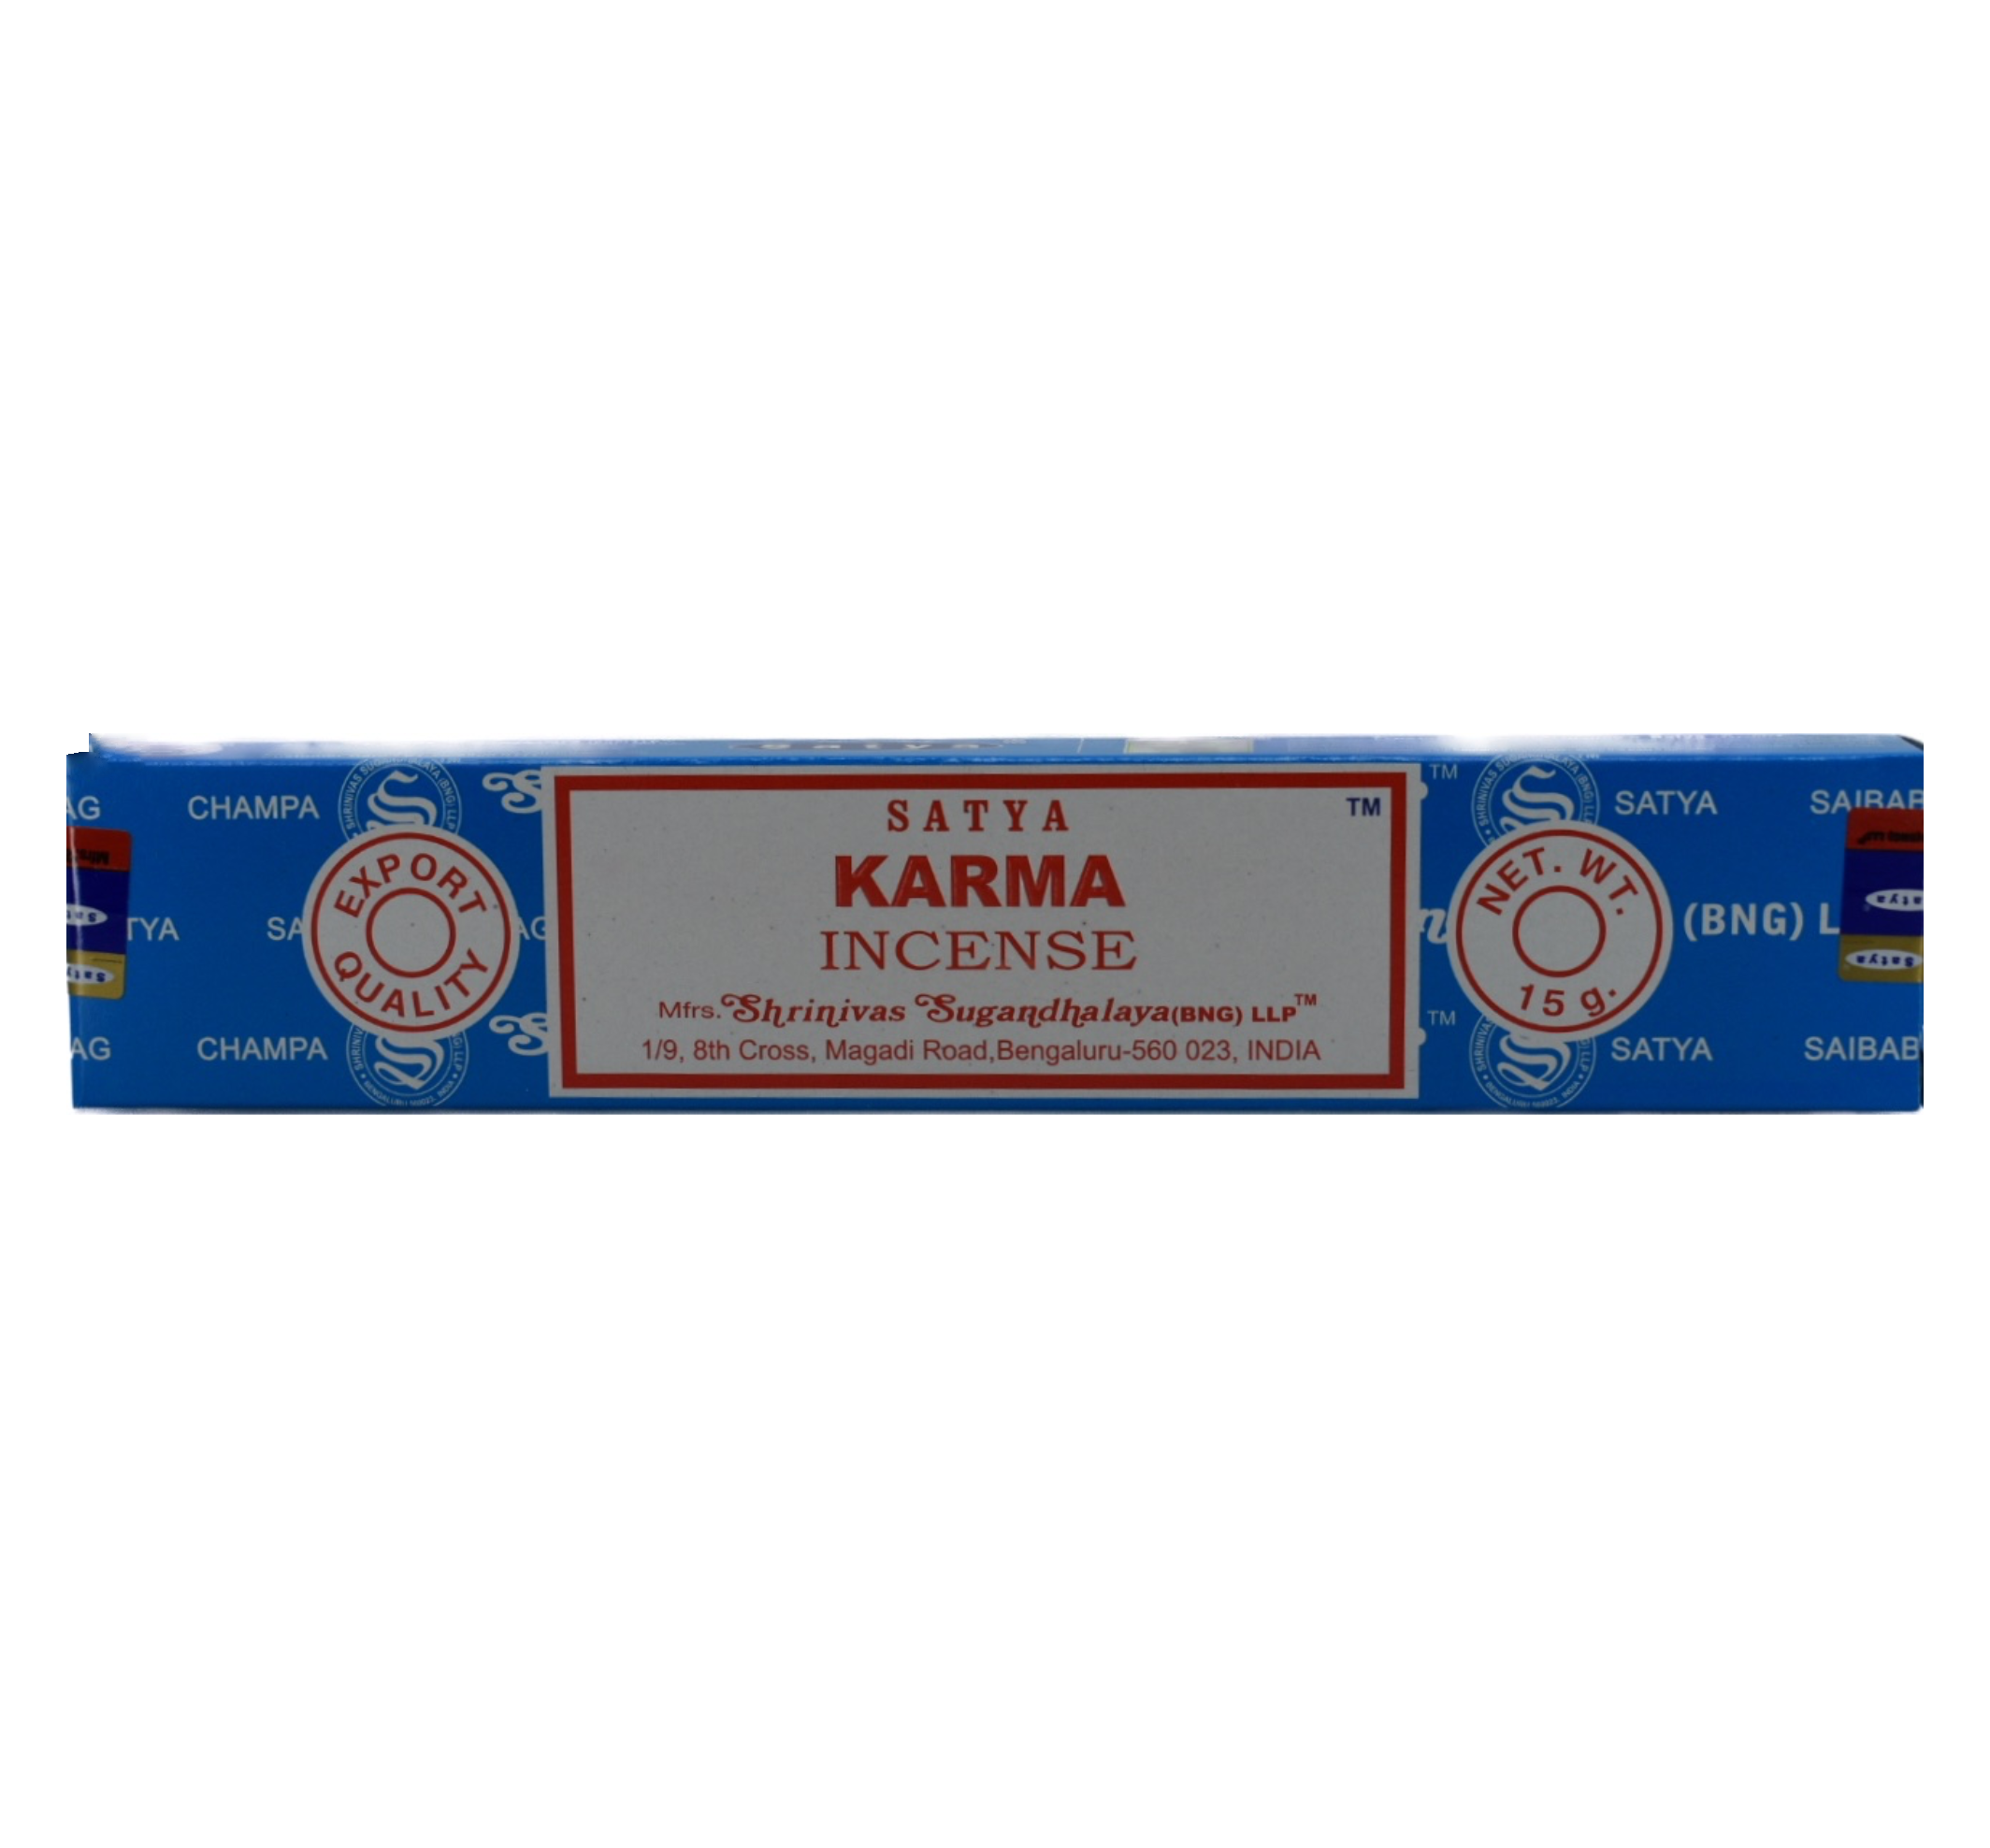 Karma 15gr Incense Sticks. Box is blue with white lines that have company words as a design. The center of the box has a white rectangle with a red frame within the border. In the rectangle the top line has the company name. The next rows have the title Karma Incense. At the bottom of the rectangle is the manufacturer&